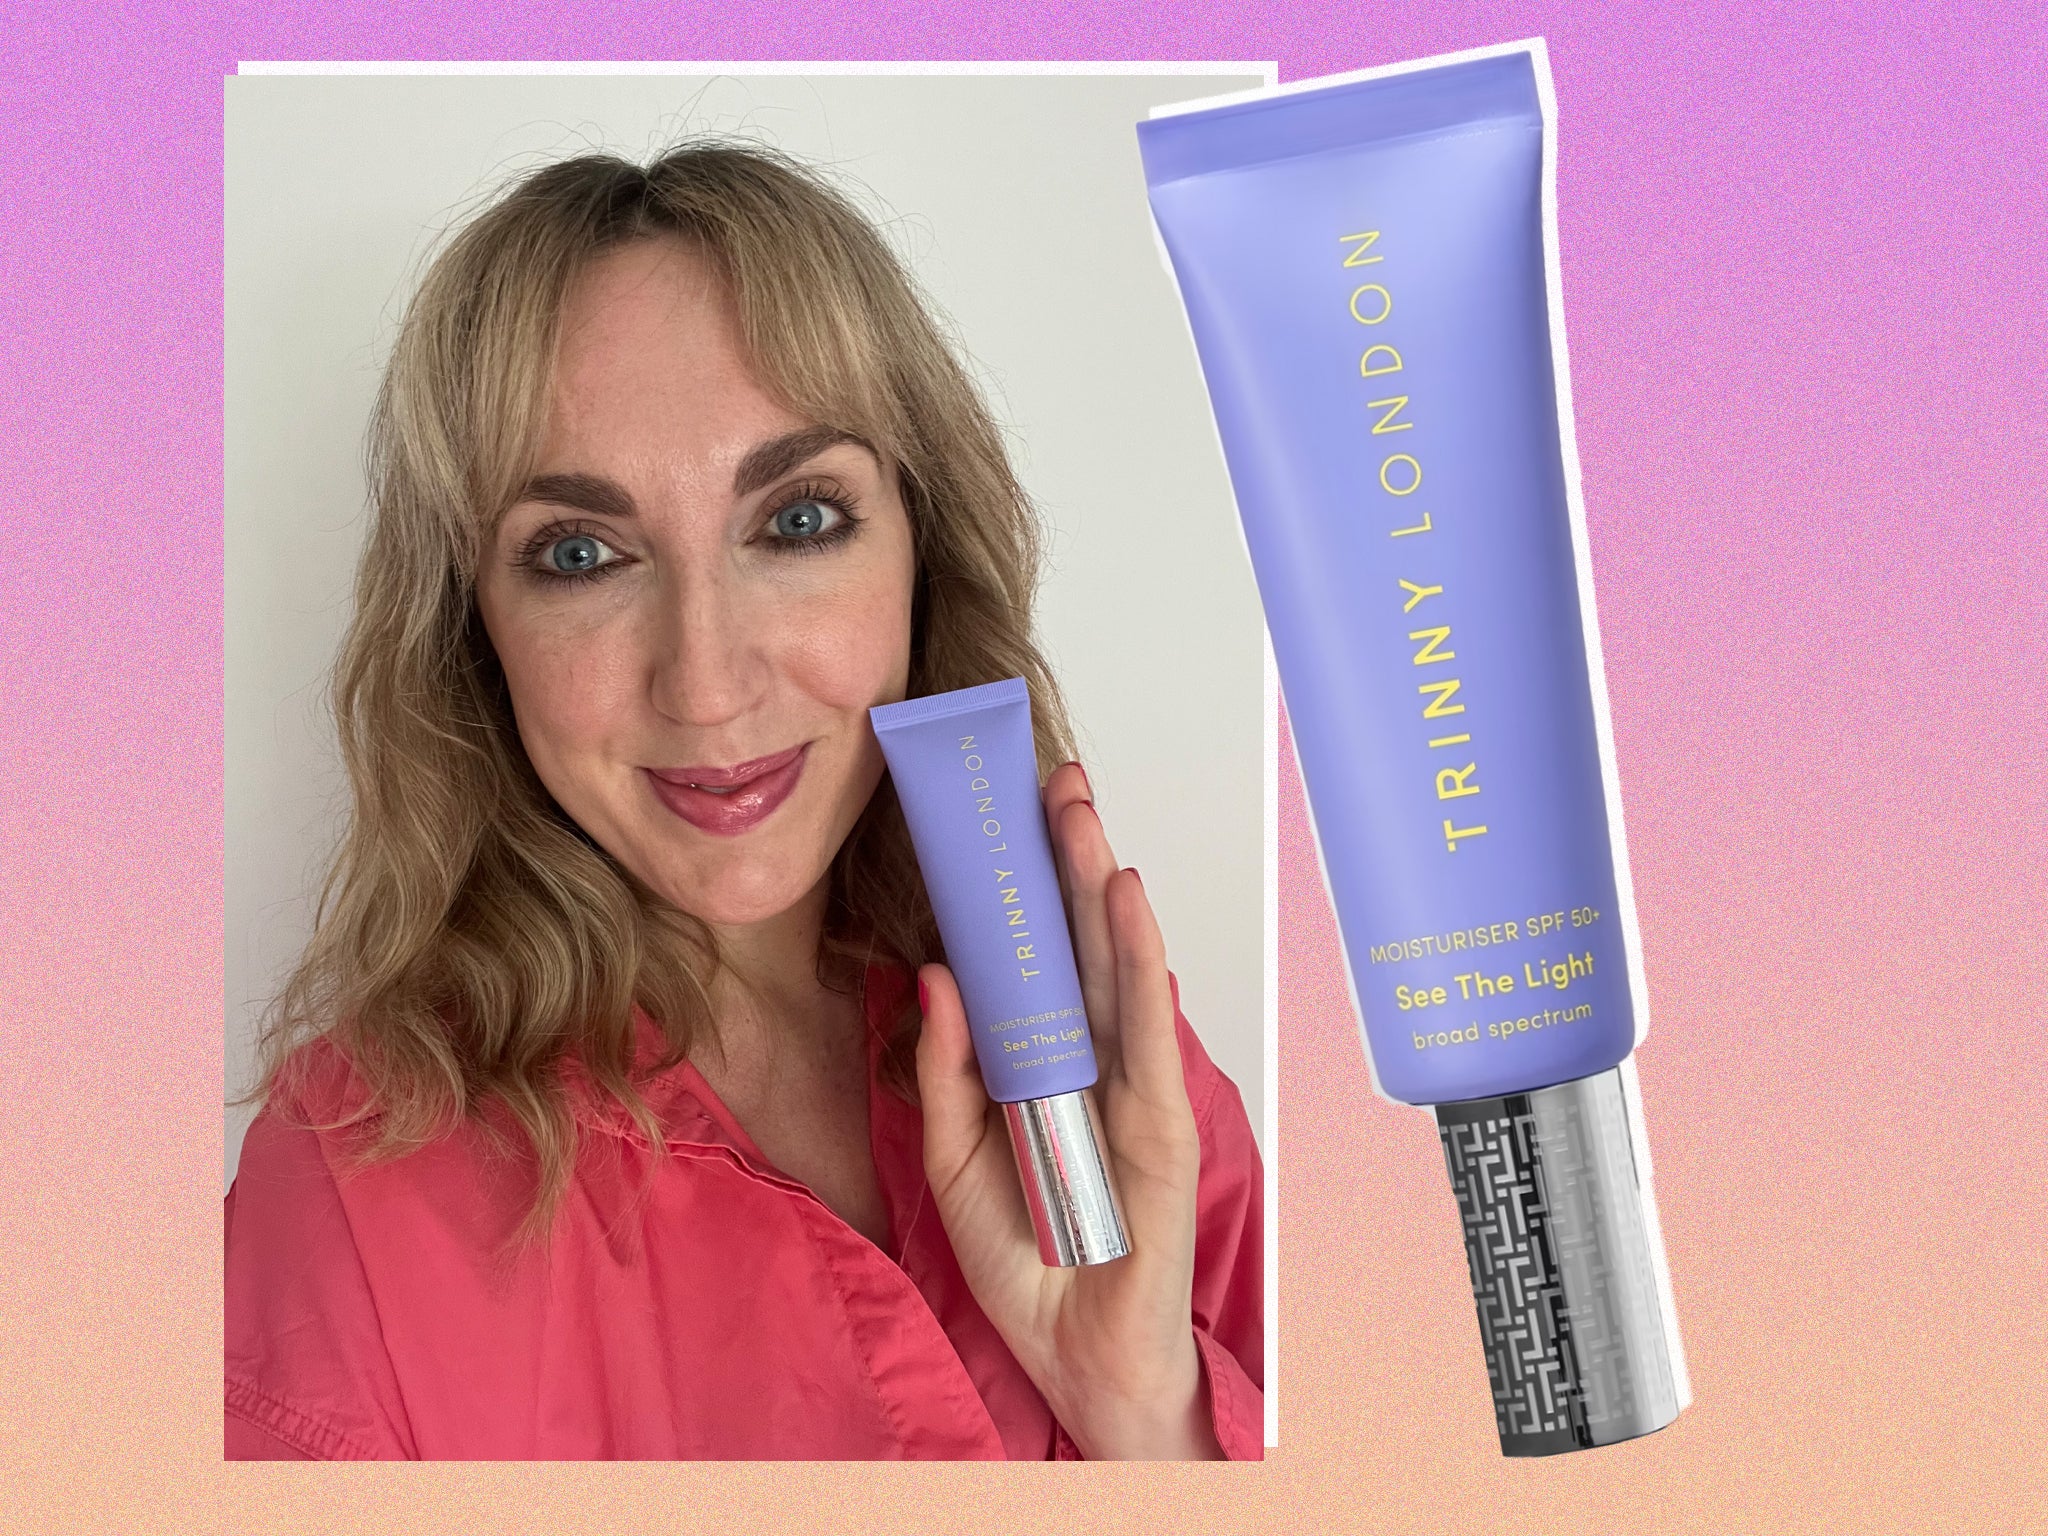 Trinny London’s launched a new SPF moisturiser – so we put it to the test